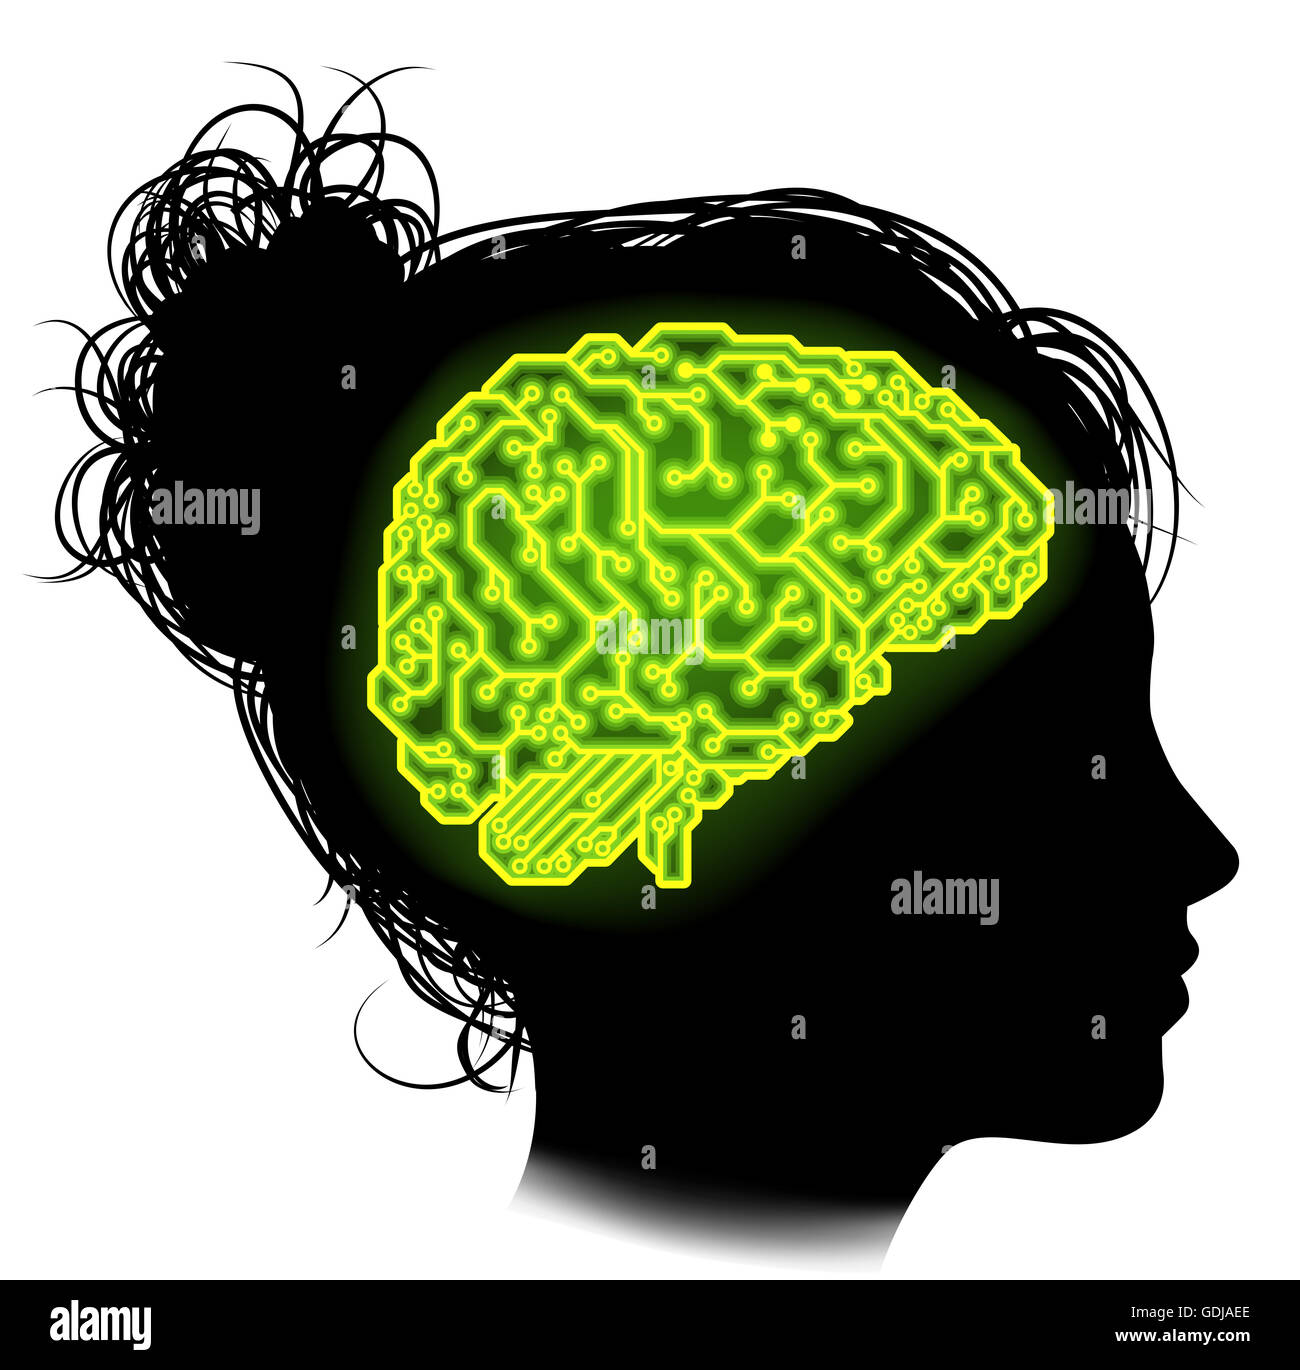 Silhouette of a woman with a brain made up of electrical circuits or a circuit board Stock Photo